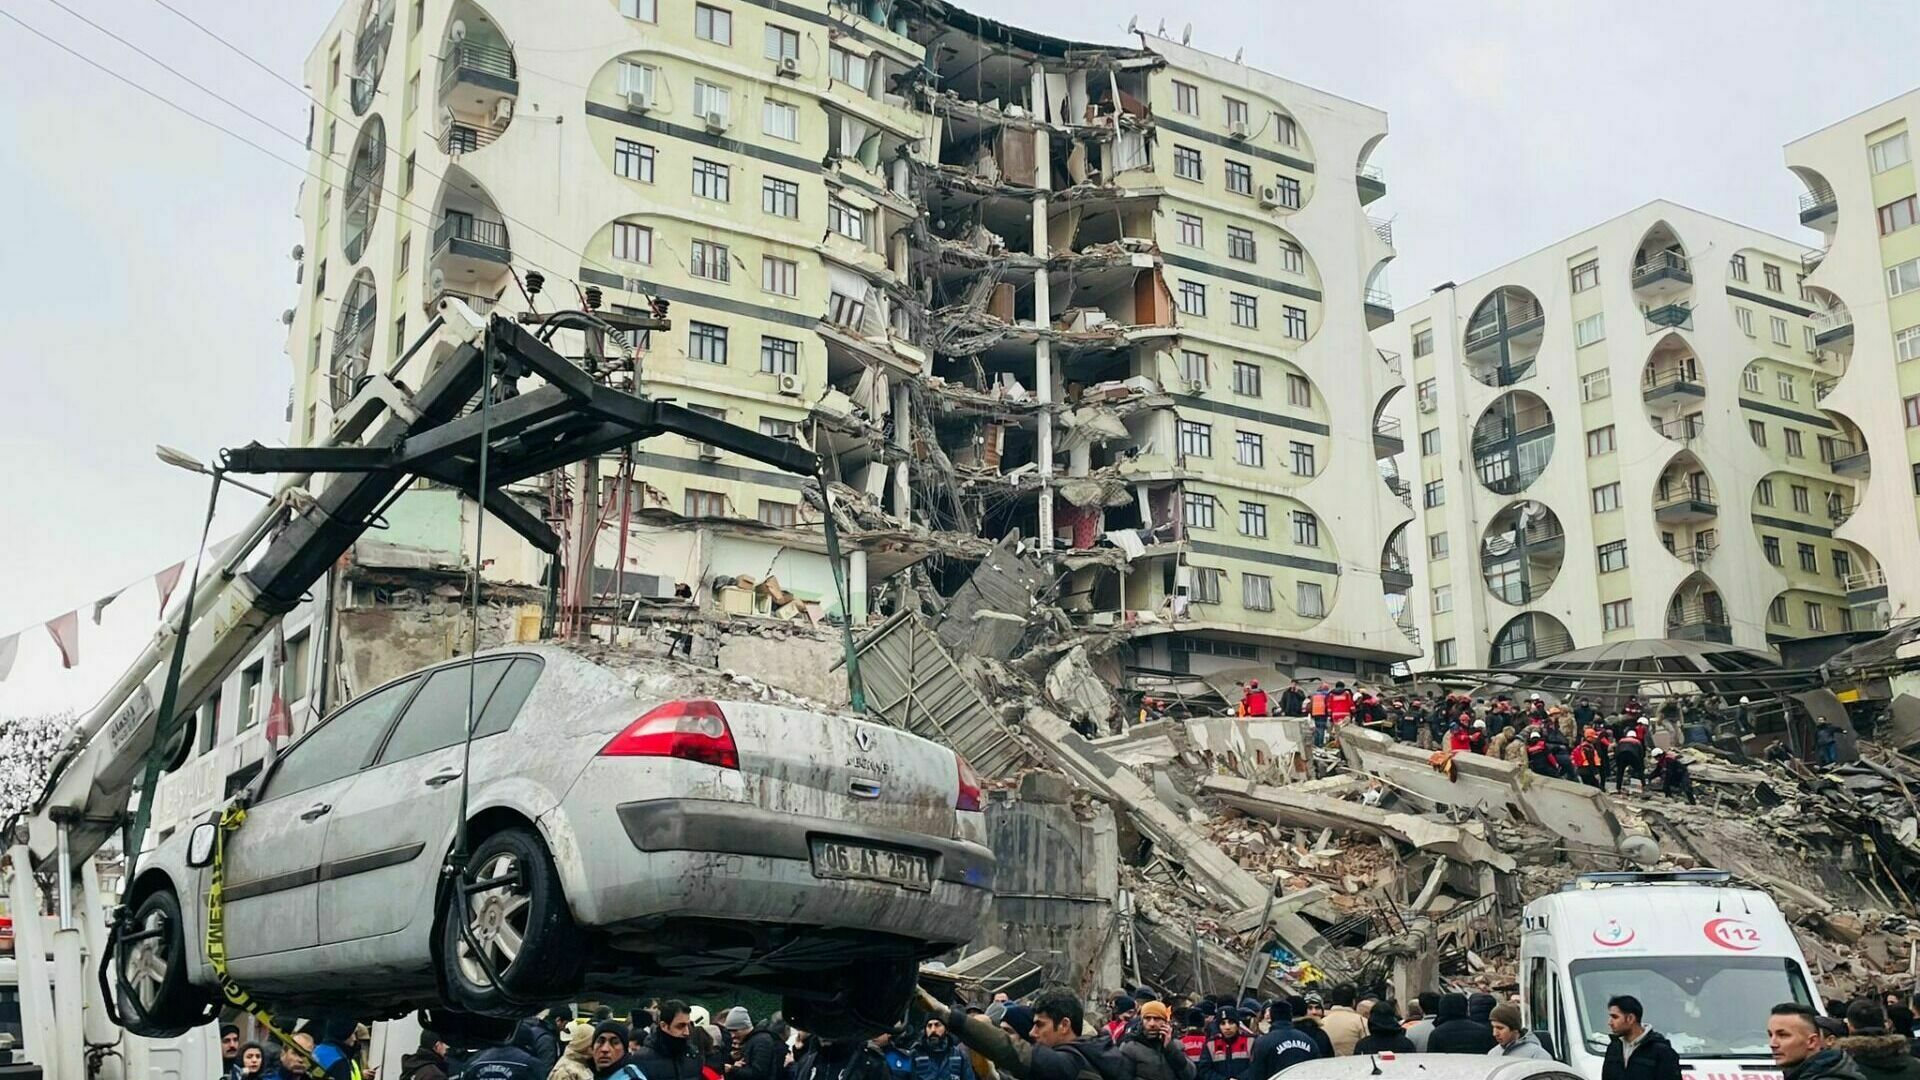 Saved on "antiseismic skeletons": experts named the reason for the terrible destruction and victims in Turkey